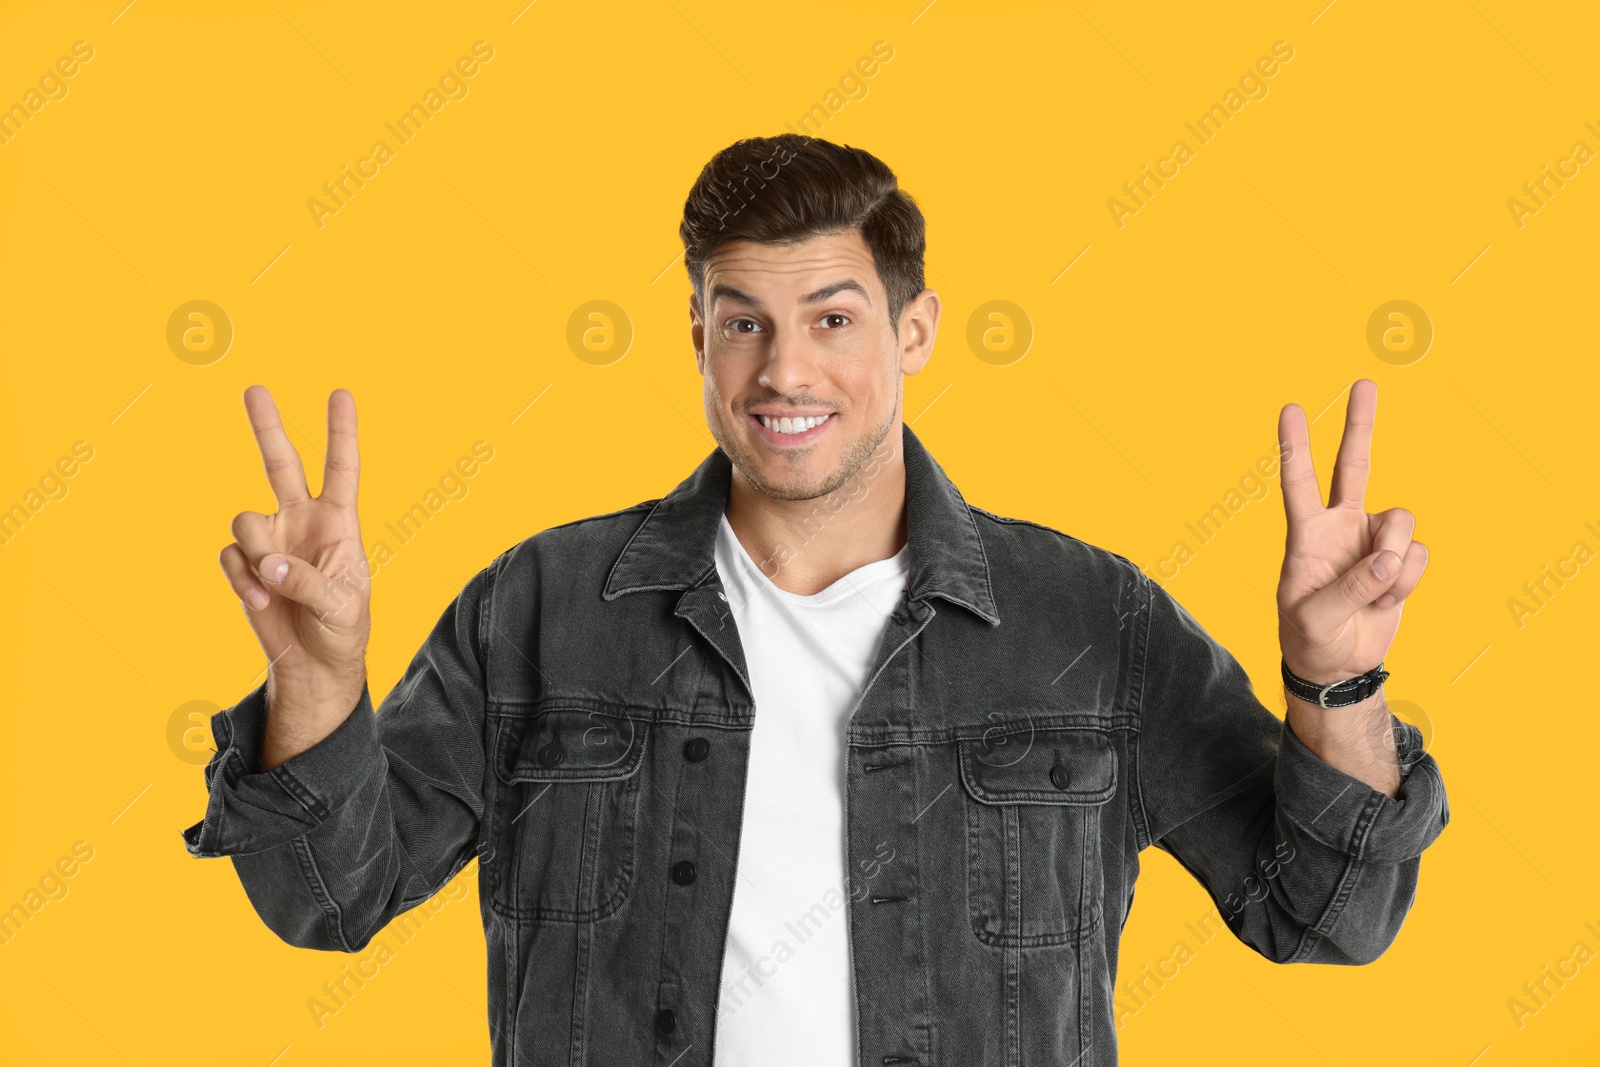 Photo of Man showing number four with his hands on yellow background